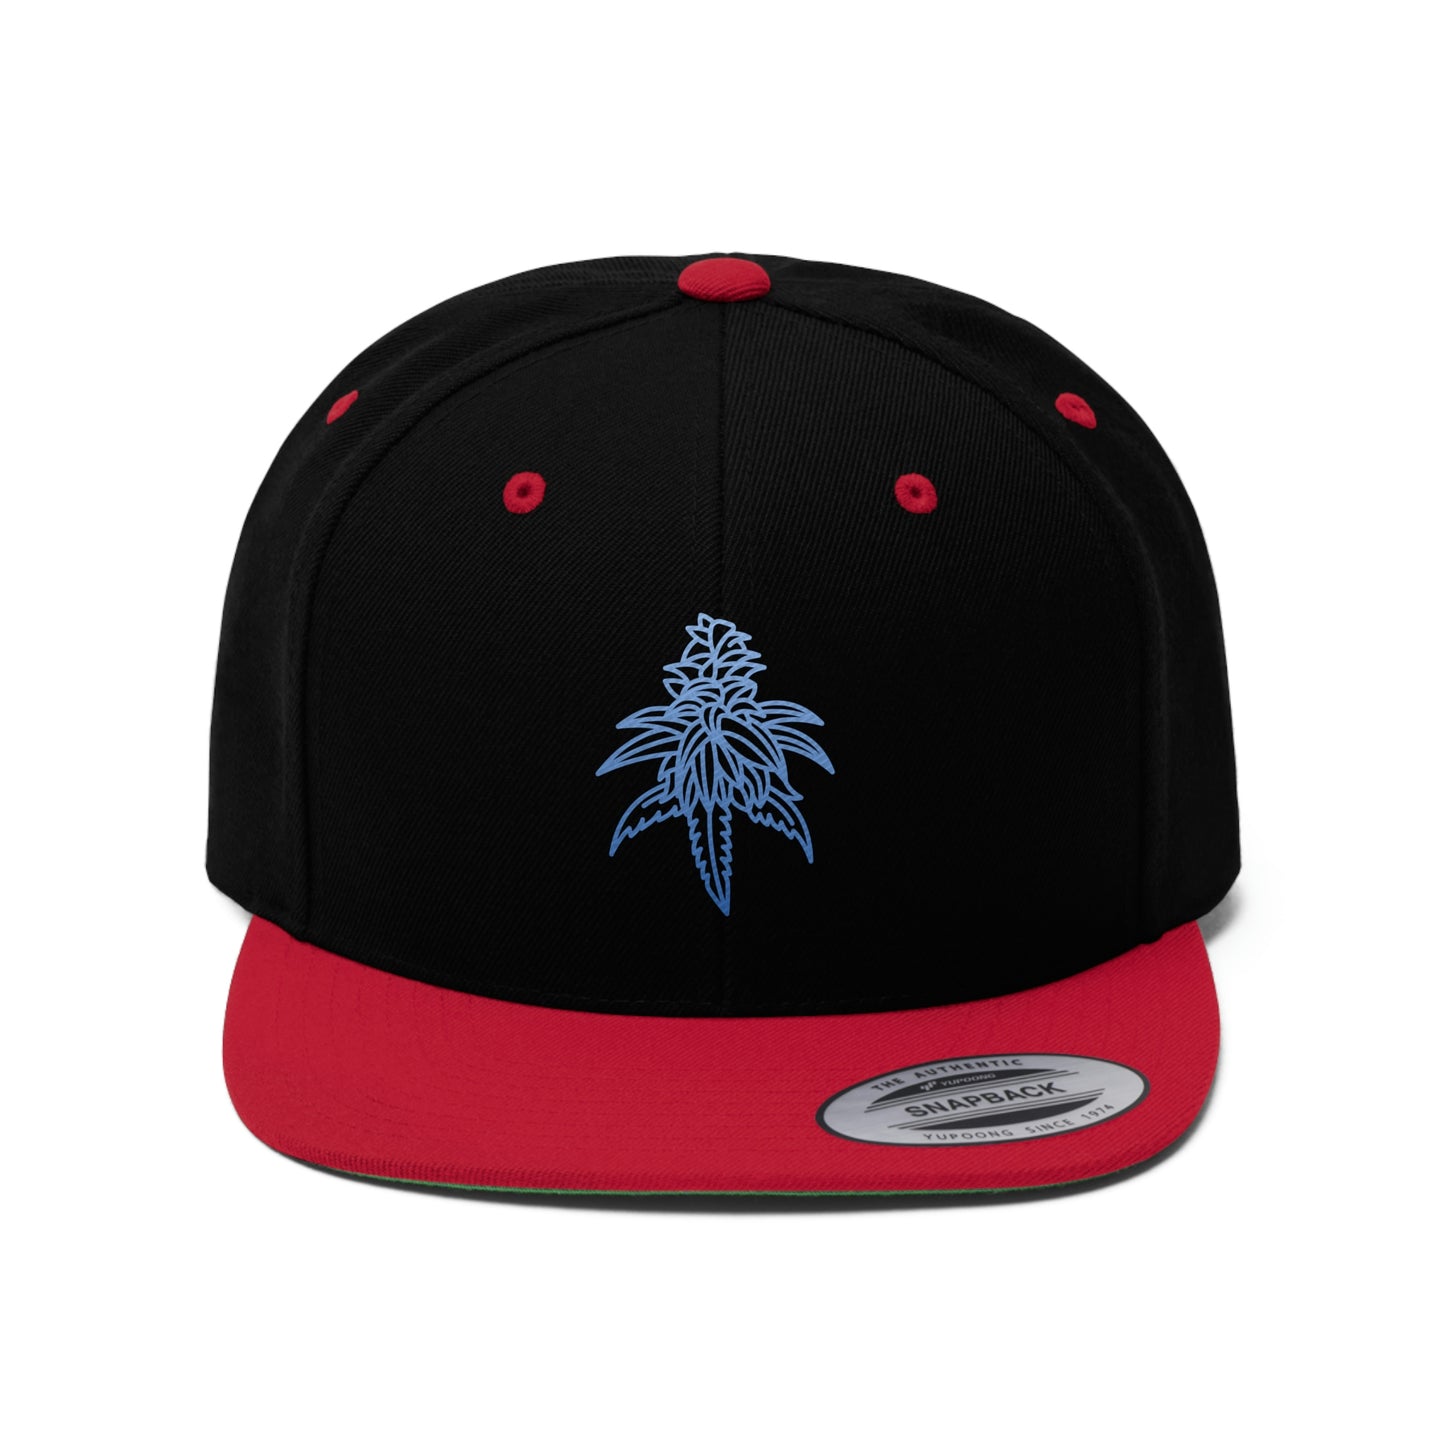 Blue Dream Snapback Hat in the red and black color scheme with the picture of blue dream on the front center in blue